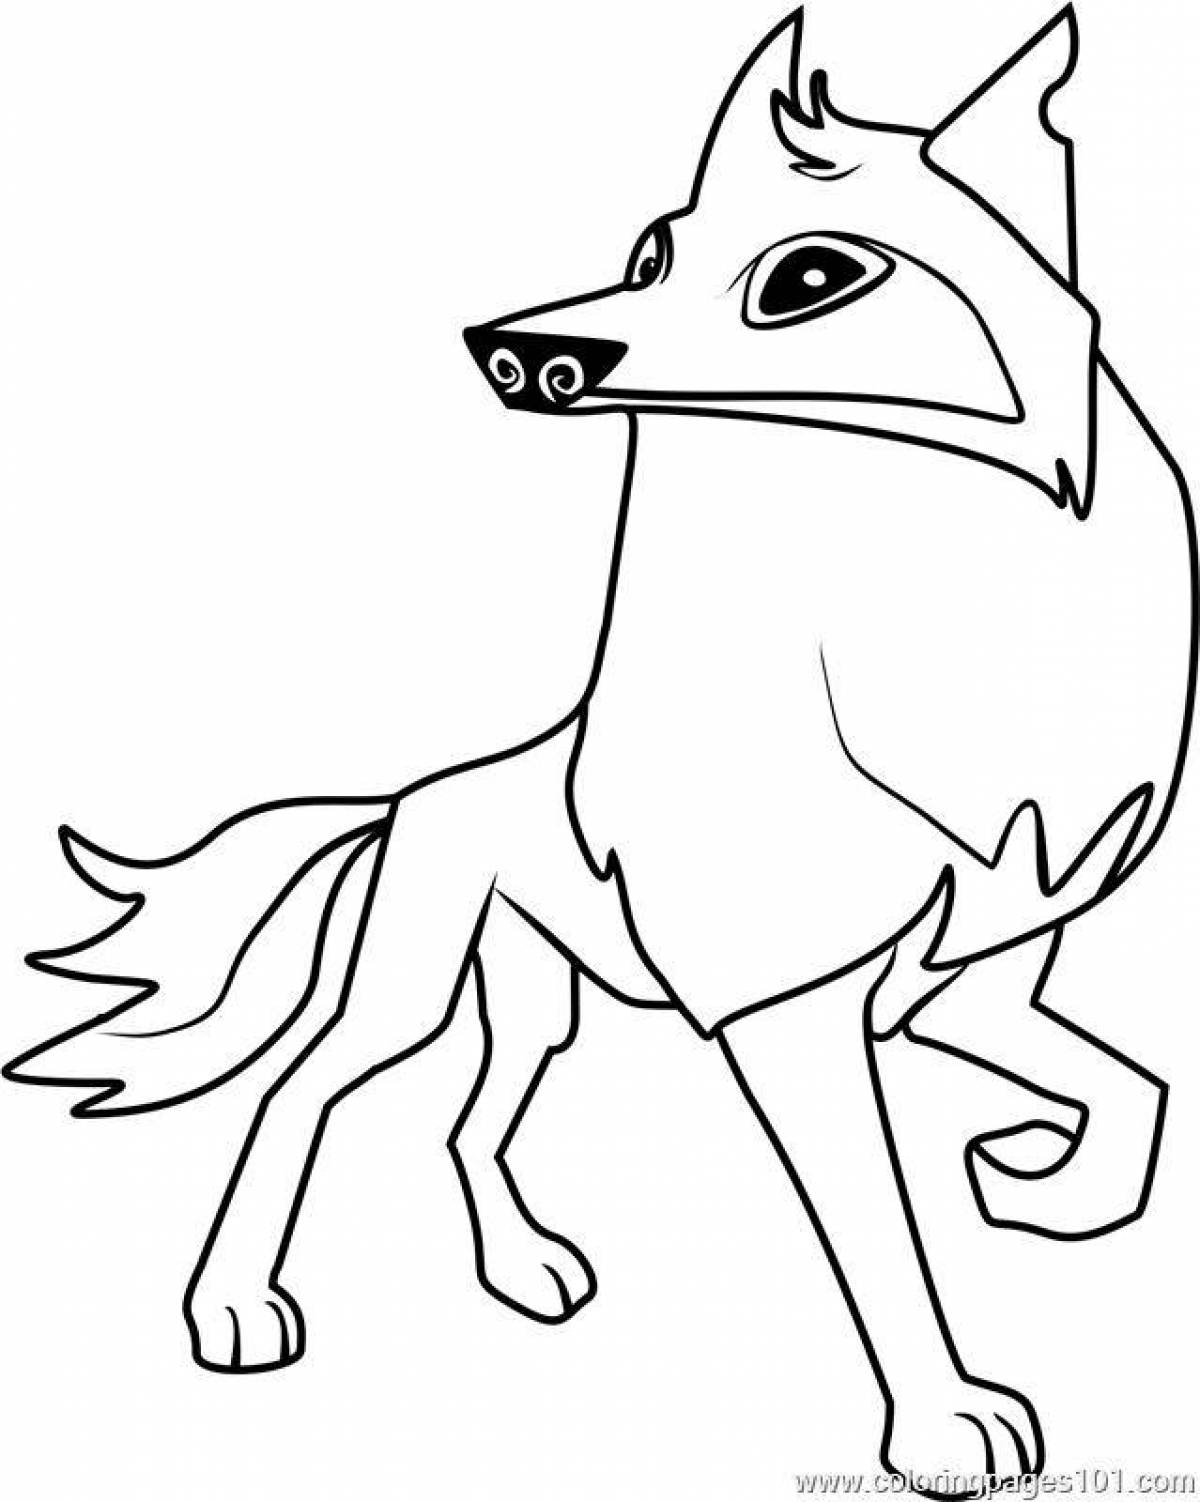 Lovely wild craft coloring page